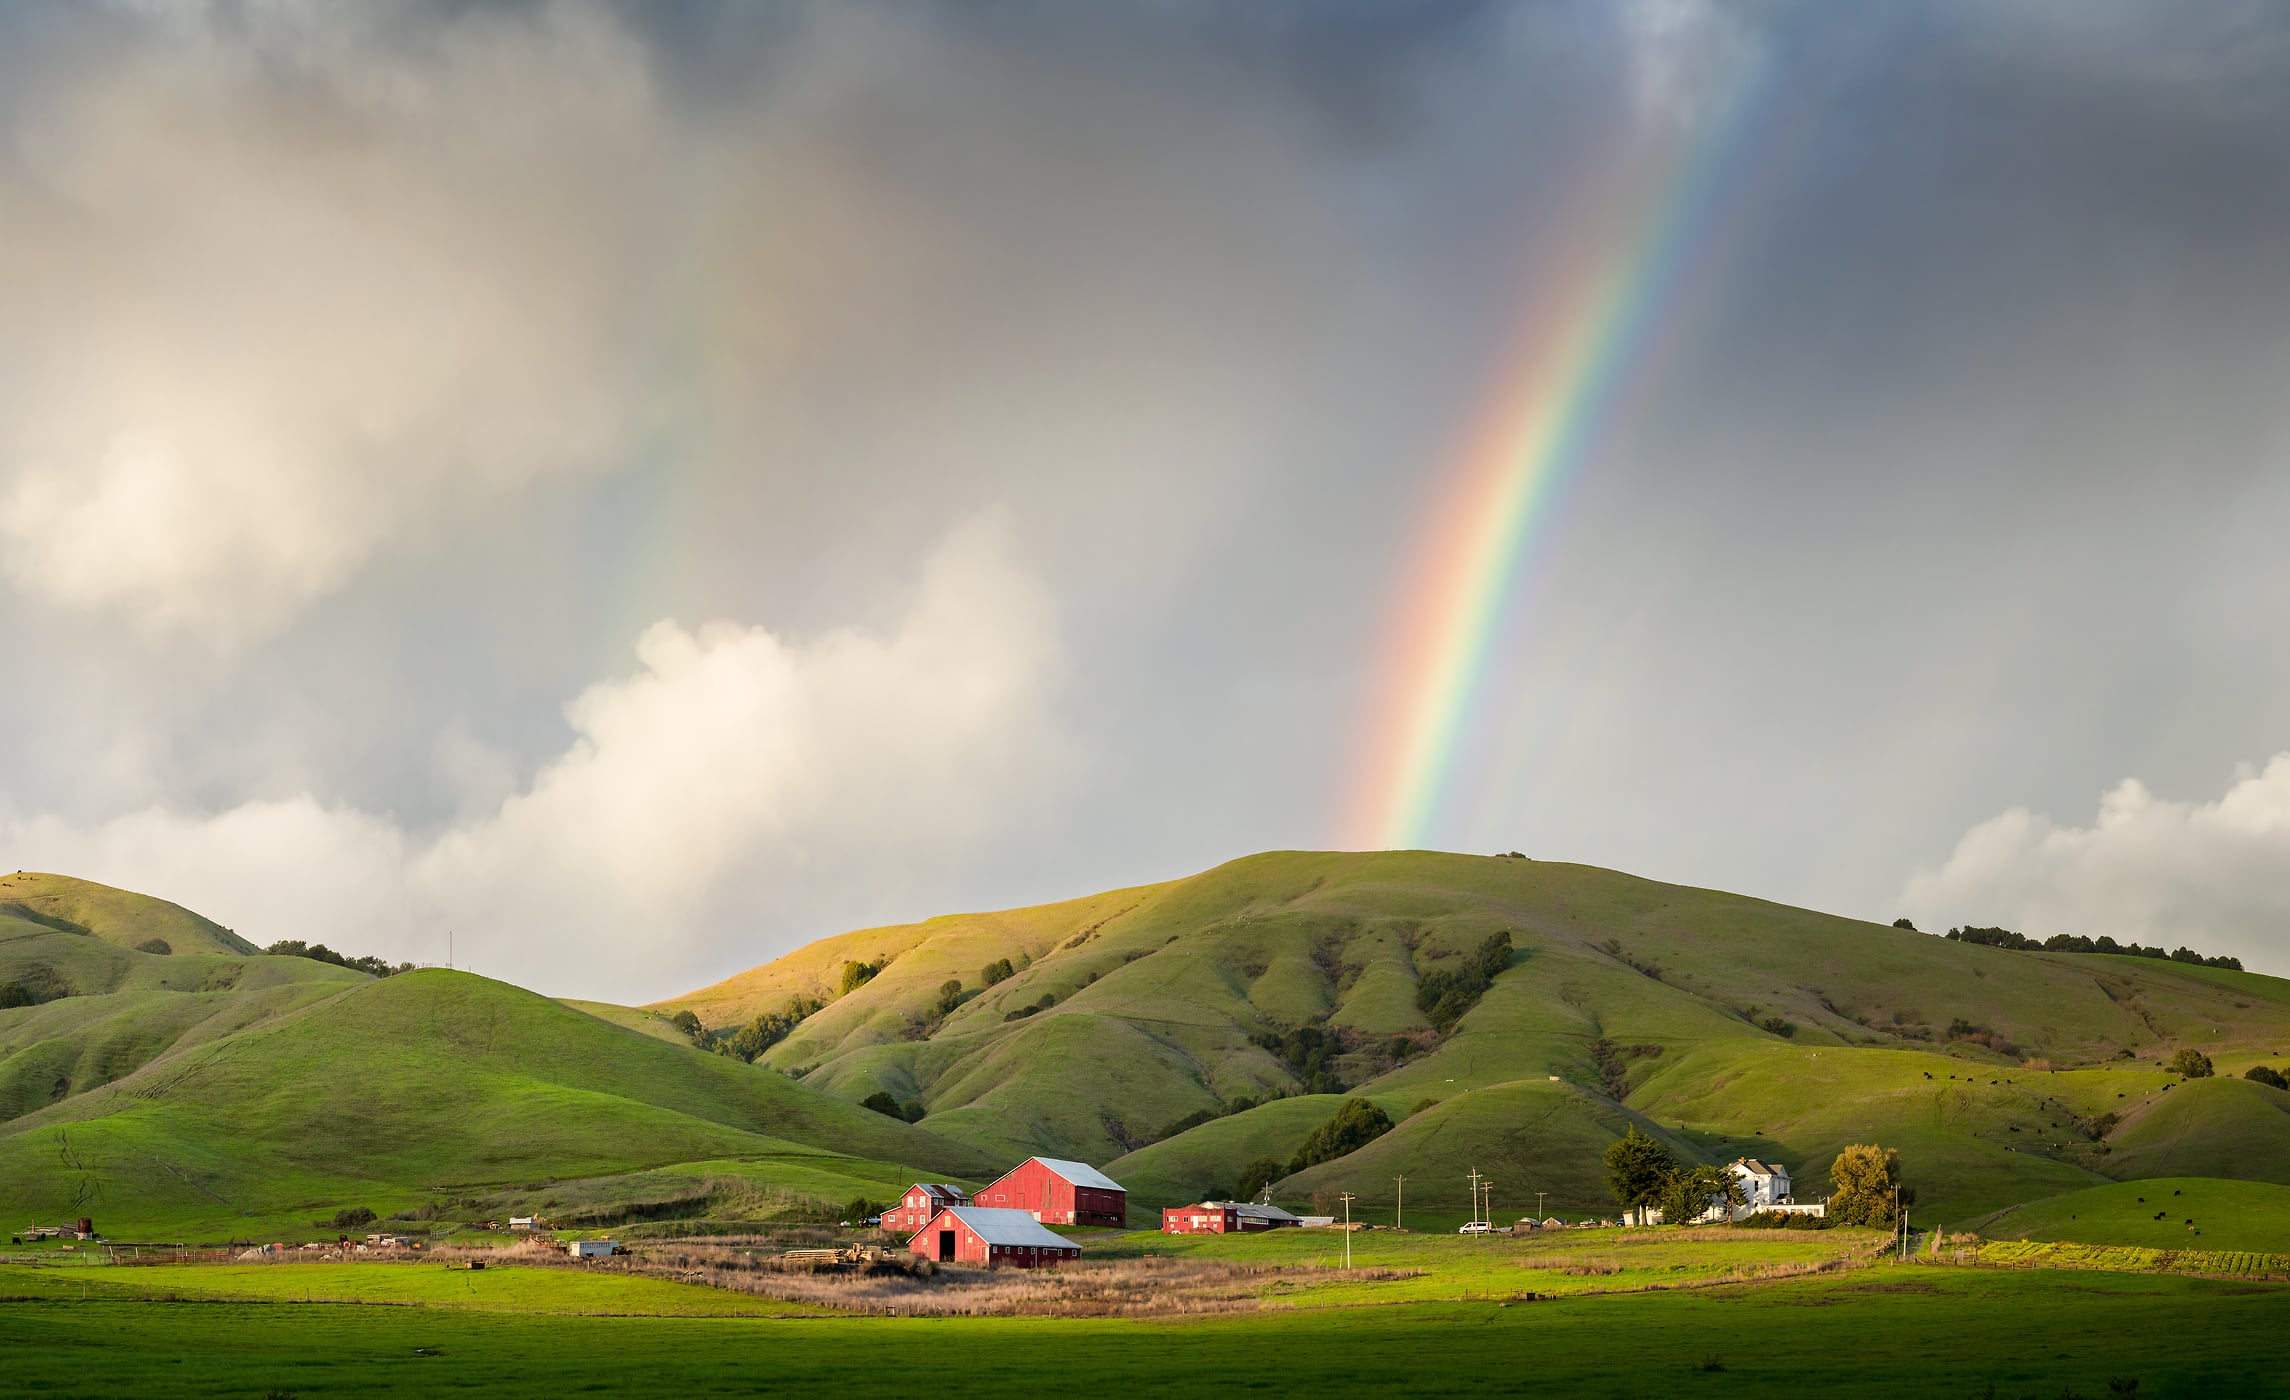 143 megapixels! A very high resolution, large-format VAST photo print of a farm with a red barn, grassy hills, and a rainbow; landscape photograph created by Jeff Lewis in Marin County, California.